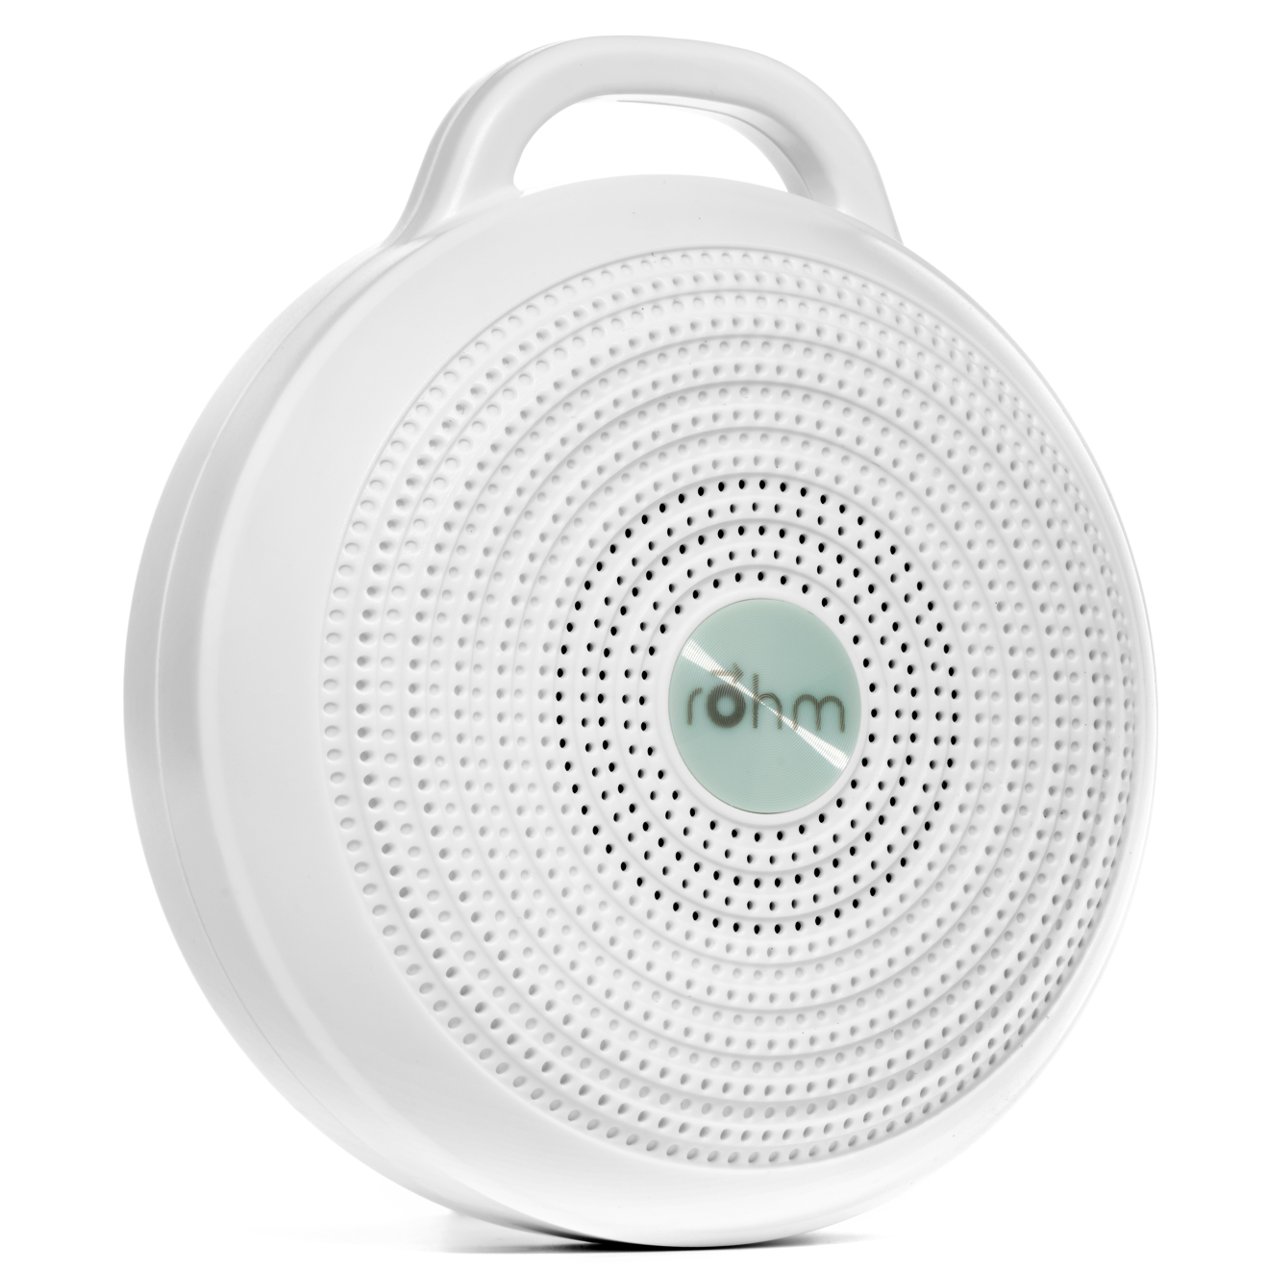 Quirks Marketing Philippines - Marpac Rohm Portable White Noise Sound Machine for Adults